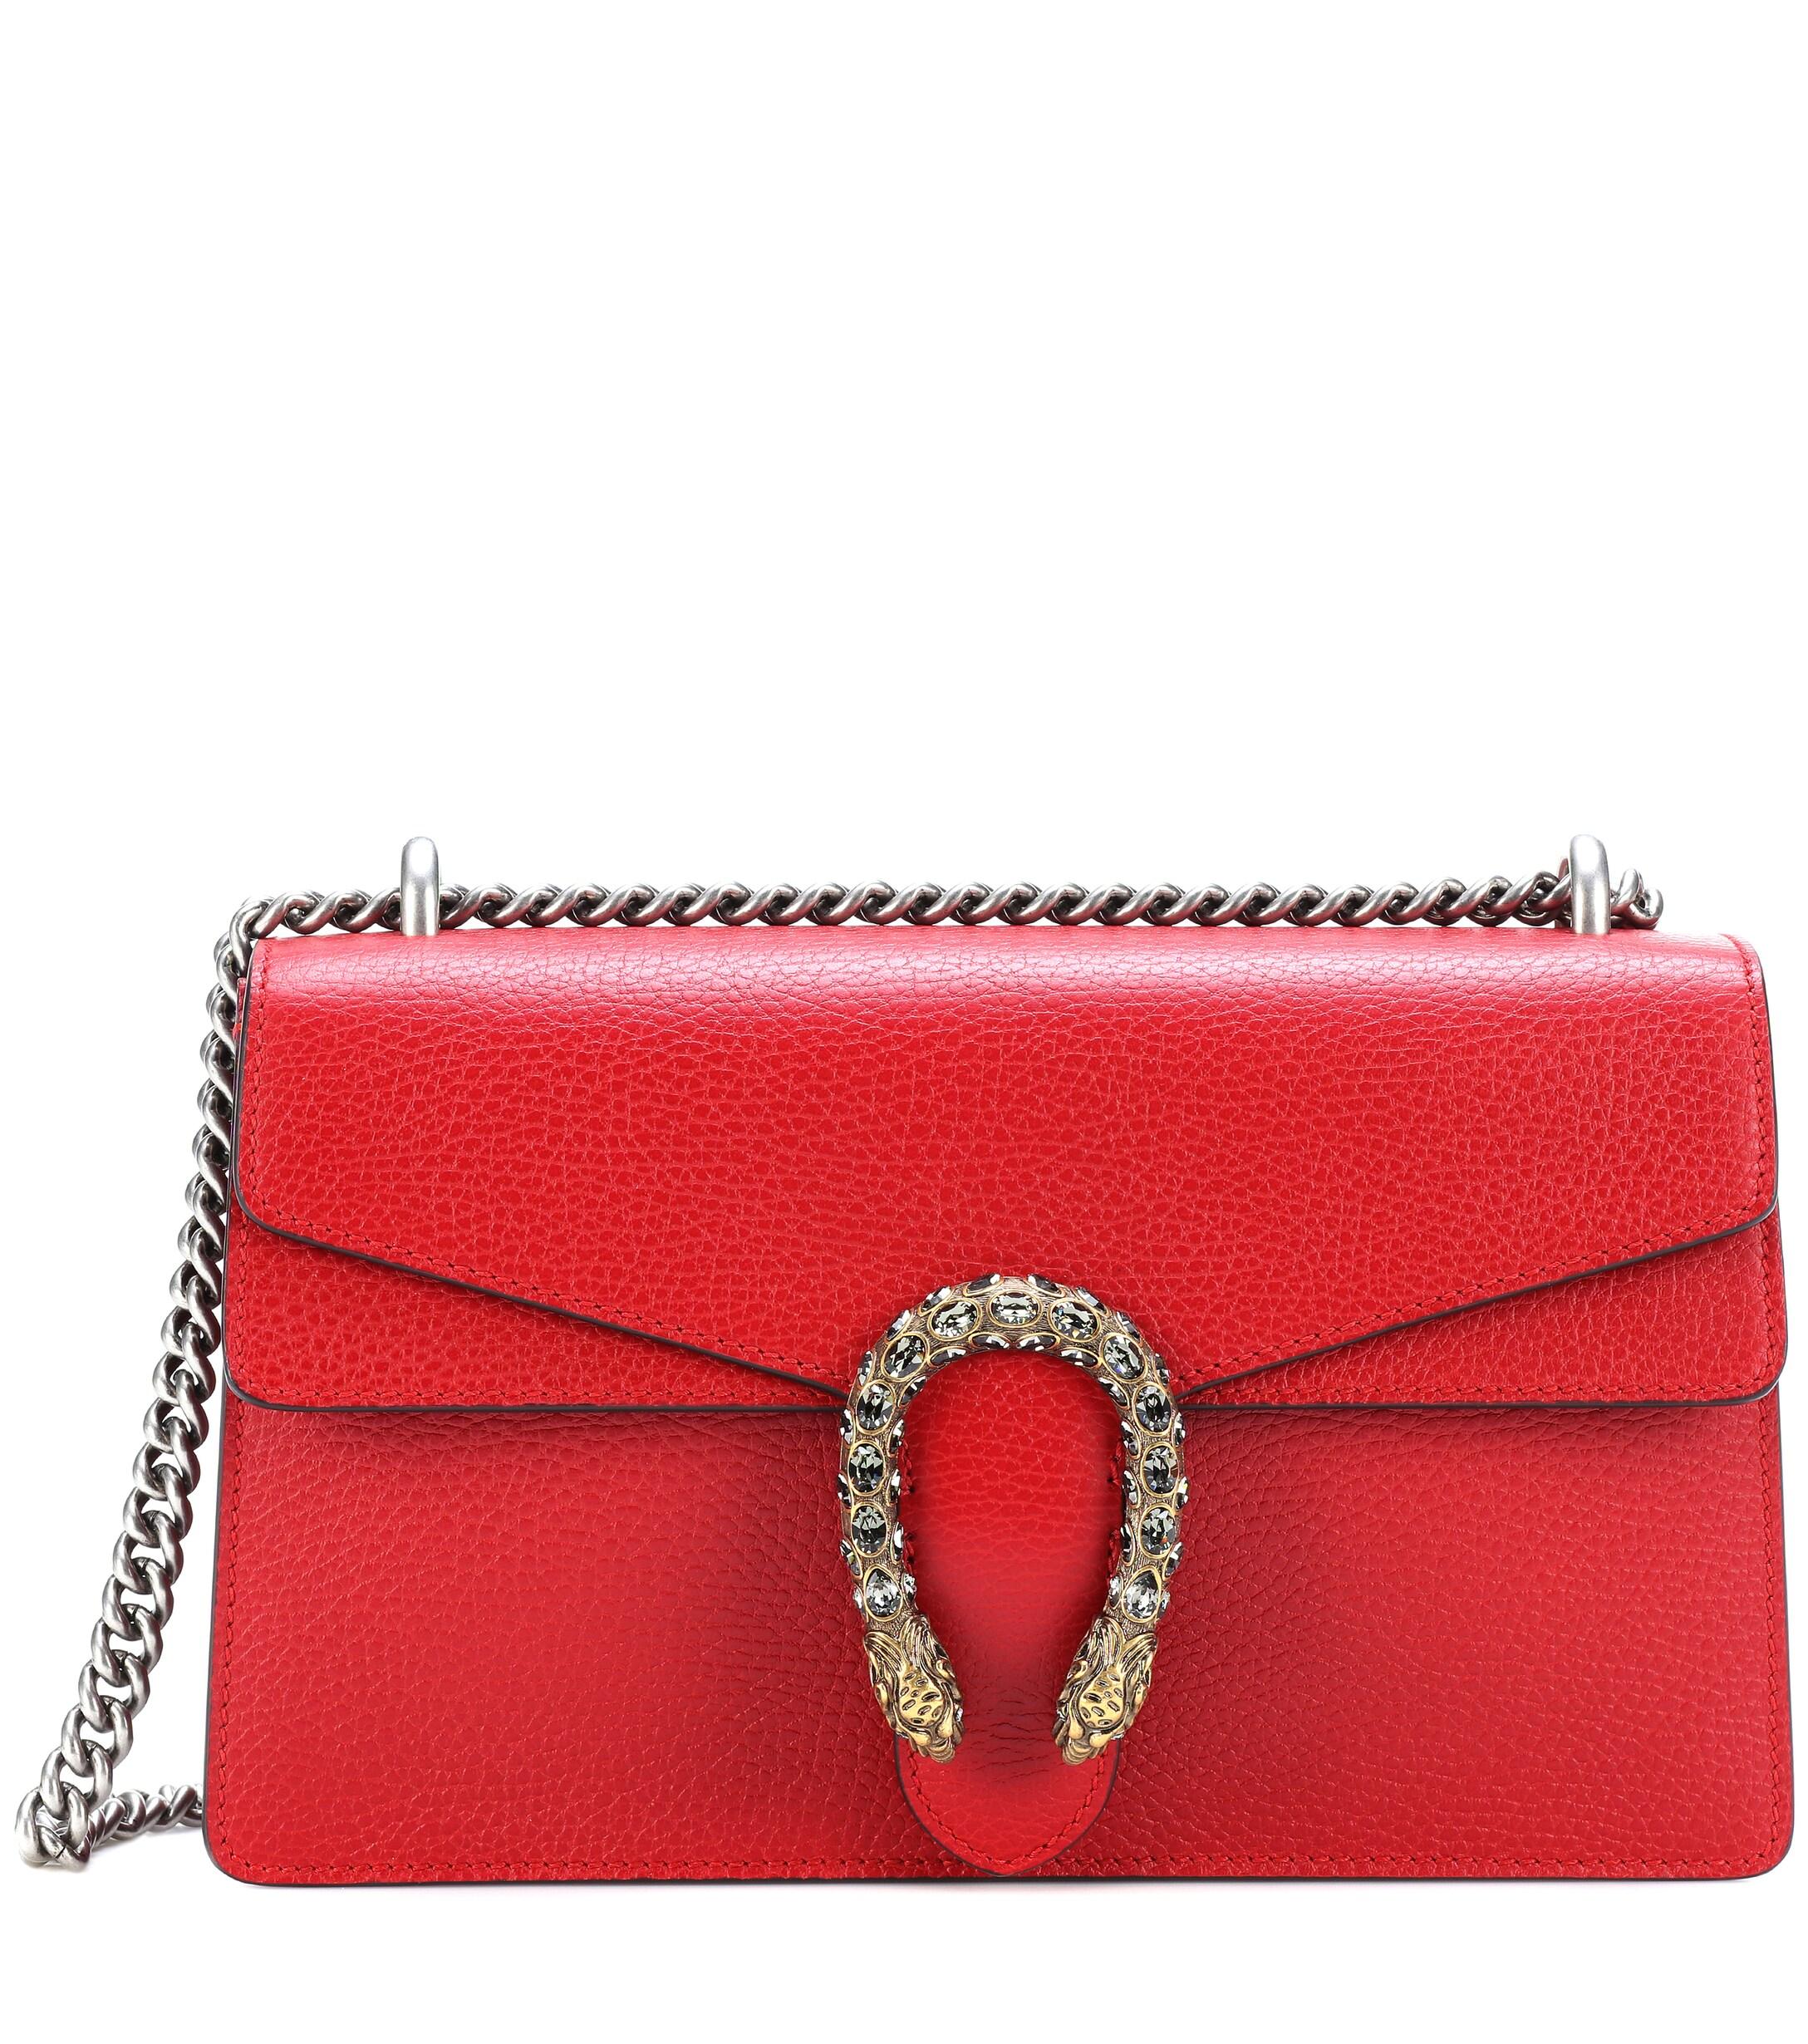 Gucci Dionysus Leather Mini Chain Shoulder Bag in Red - Save 70% | Lyst